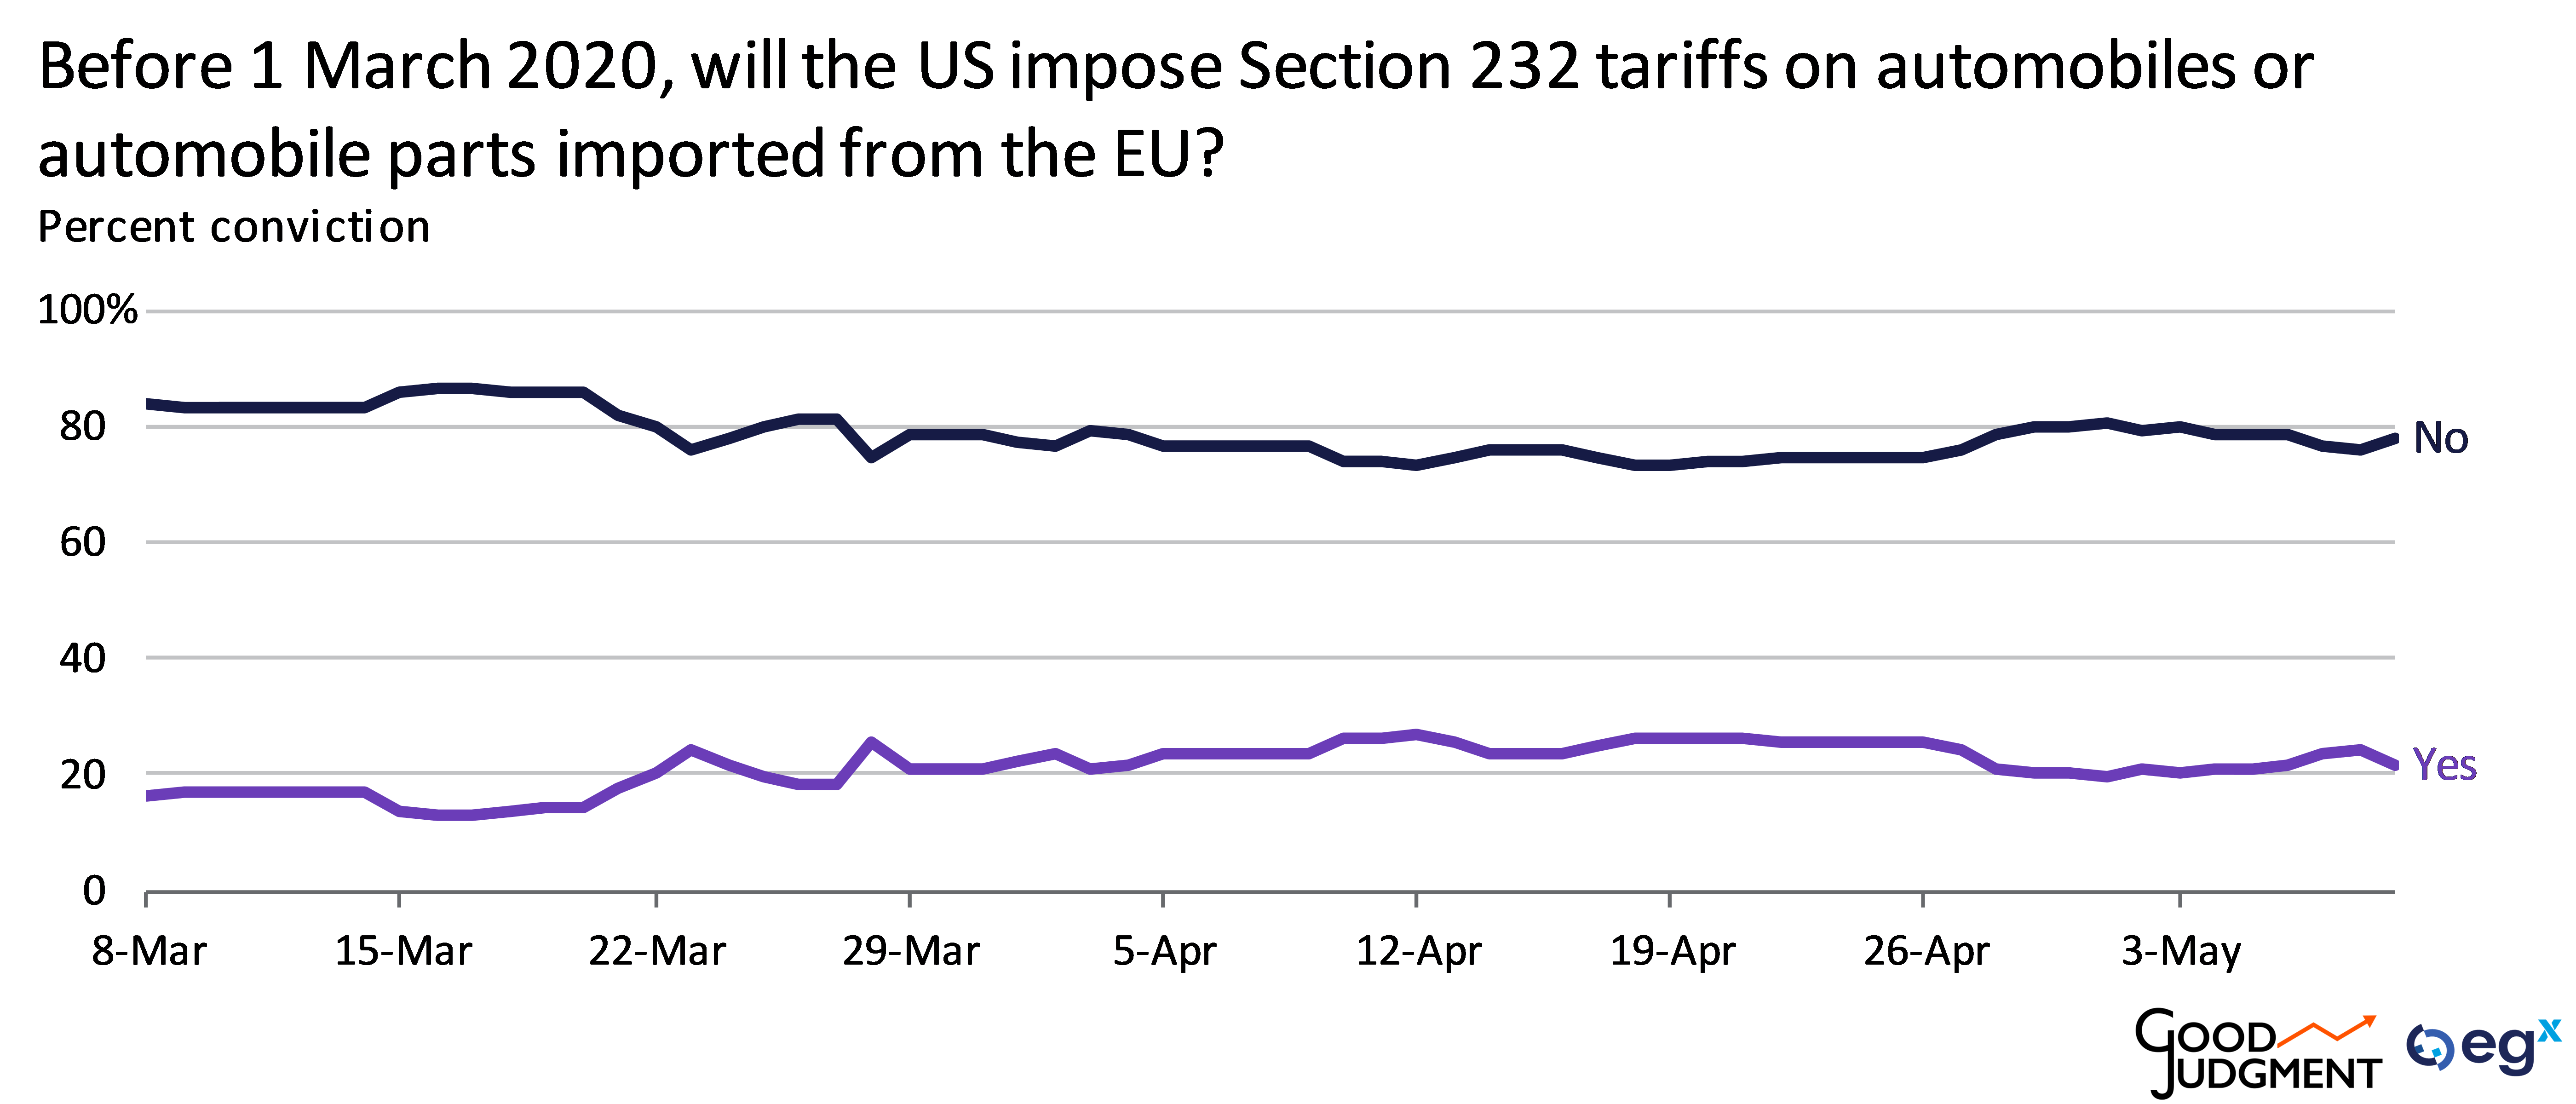 Superforecast of the US imposing Section 232 tariffs on automobiles or automobile parts imported from the EU.